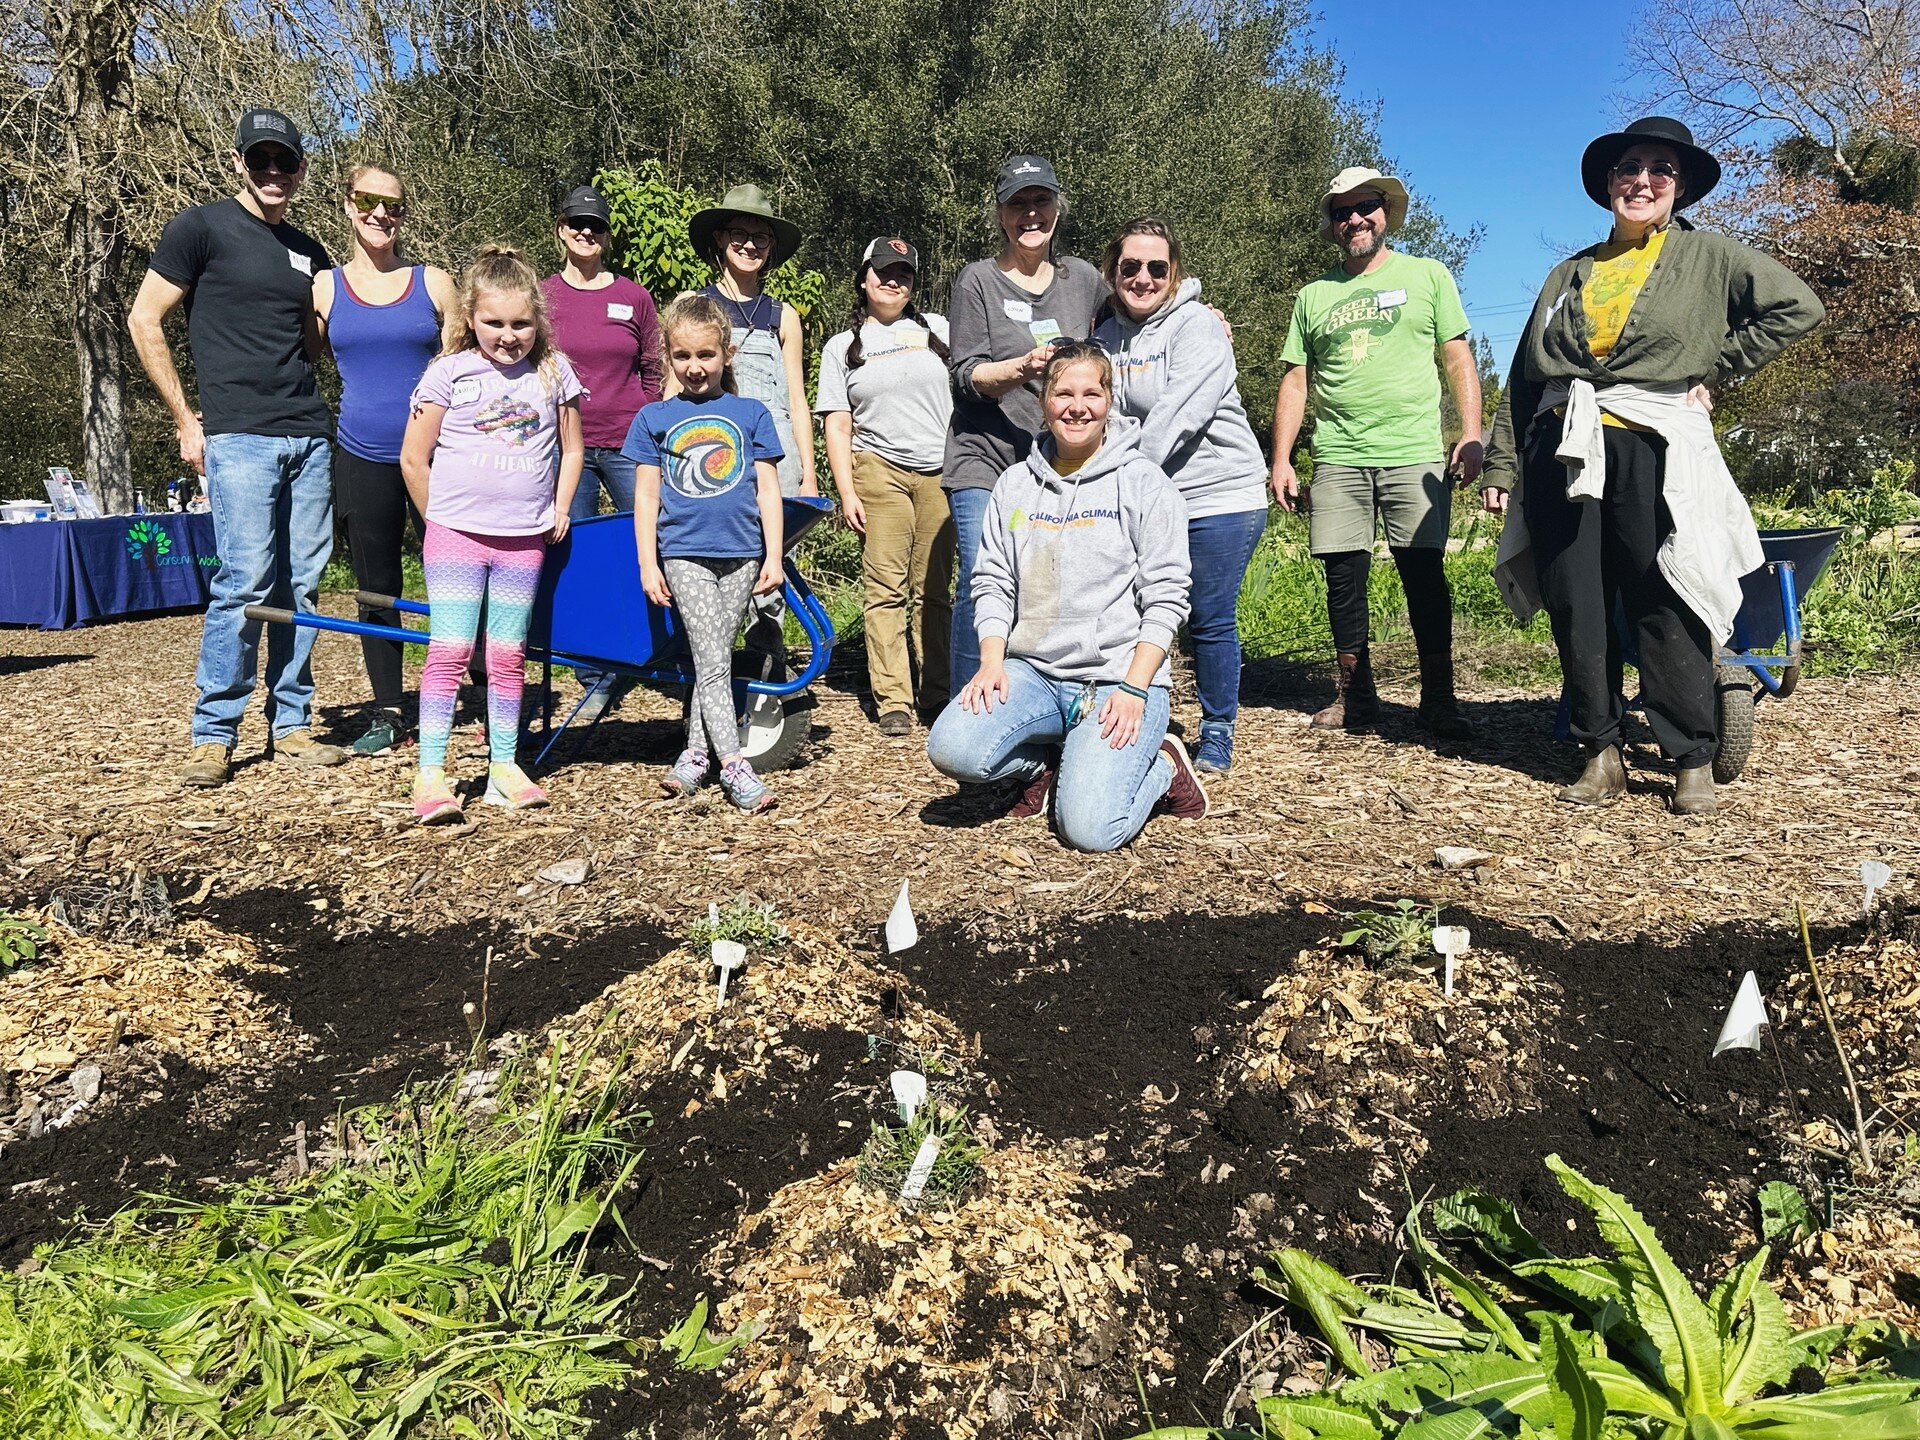 Thank you so much to our wonderful volunteers who attended our Native Plant Pollinator Patch Workshop and Volunteer Day at the Larkfield Community Garden on 2/24! We're so grateful for your hard work and can't wait to see what this little habitat gar